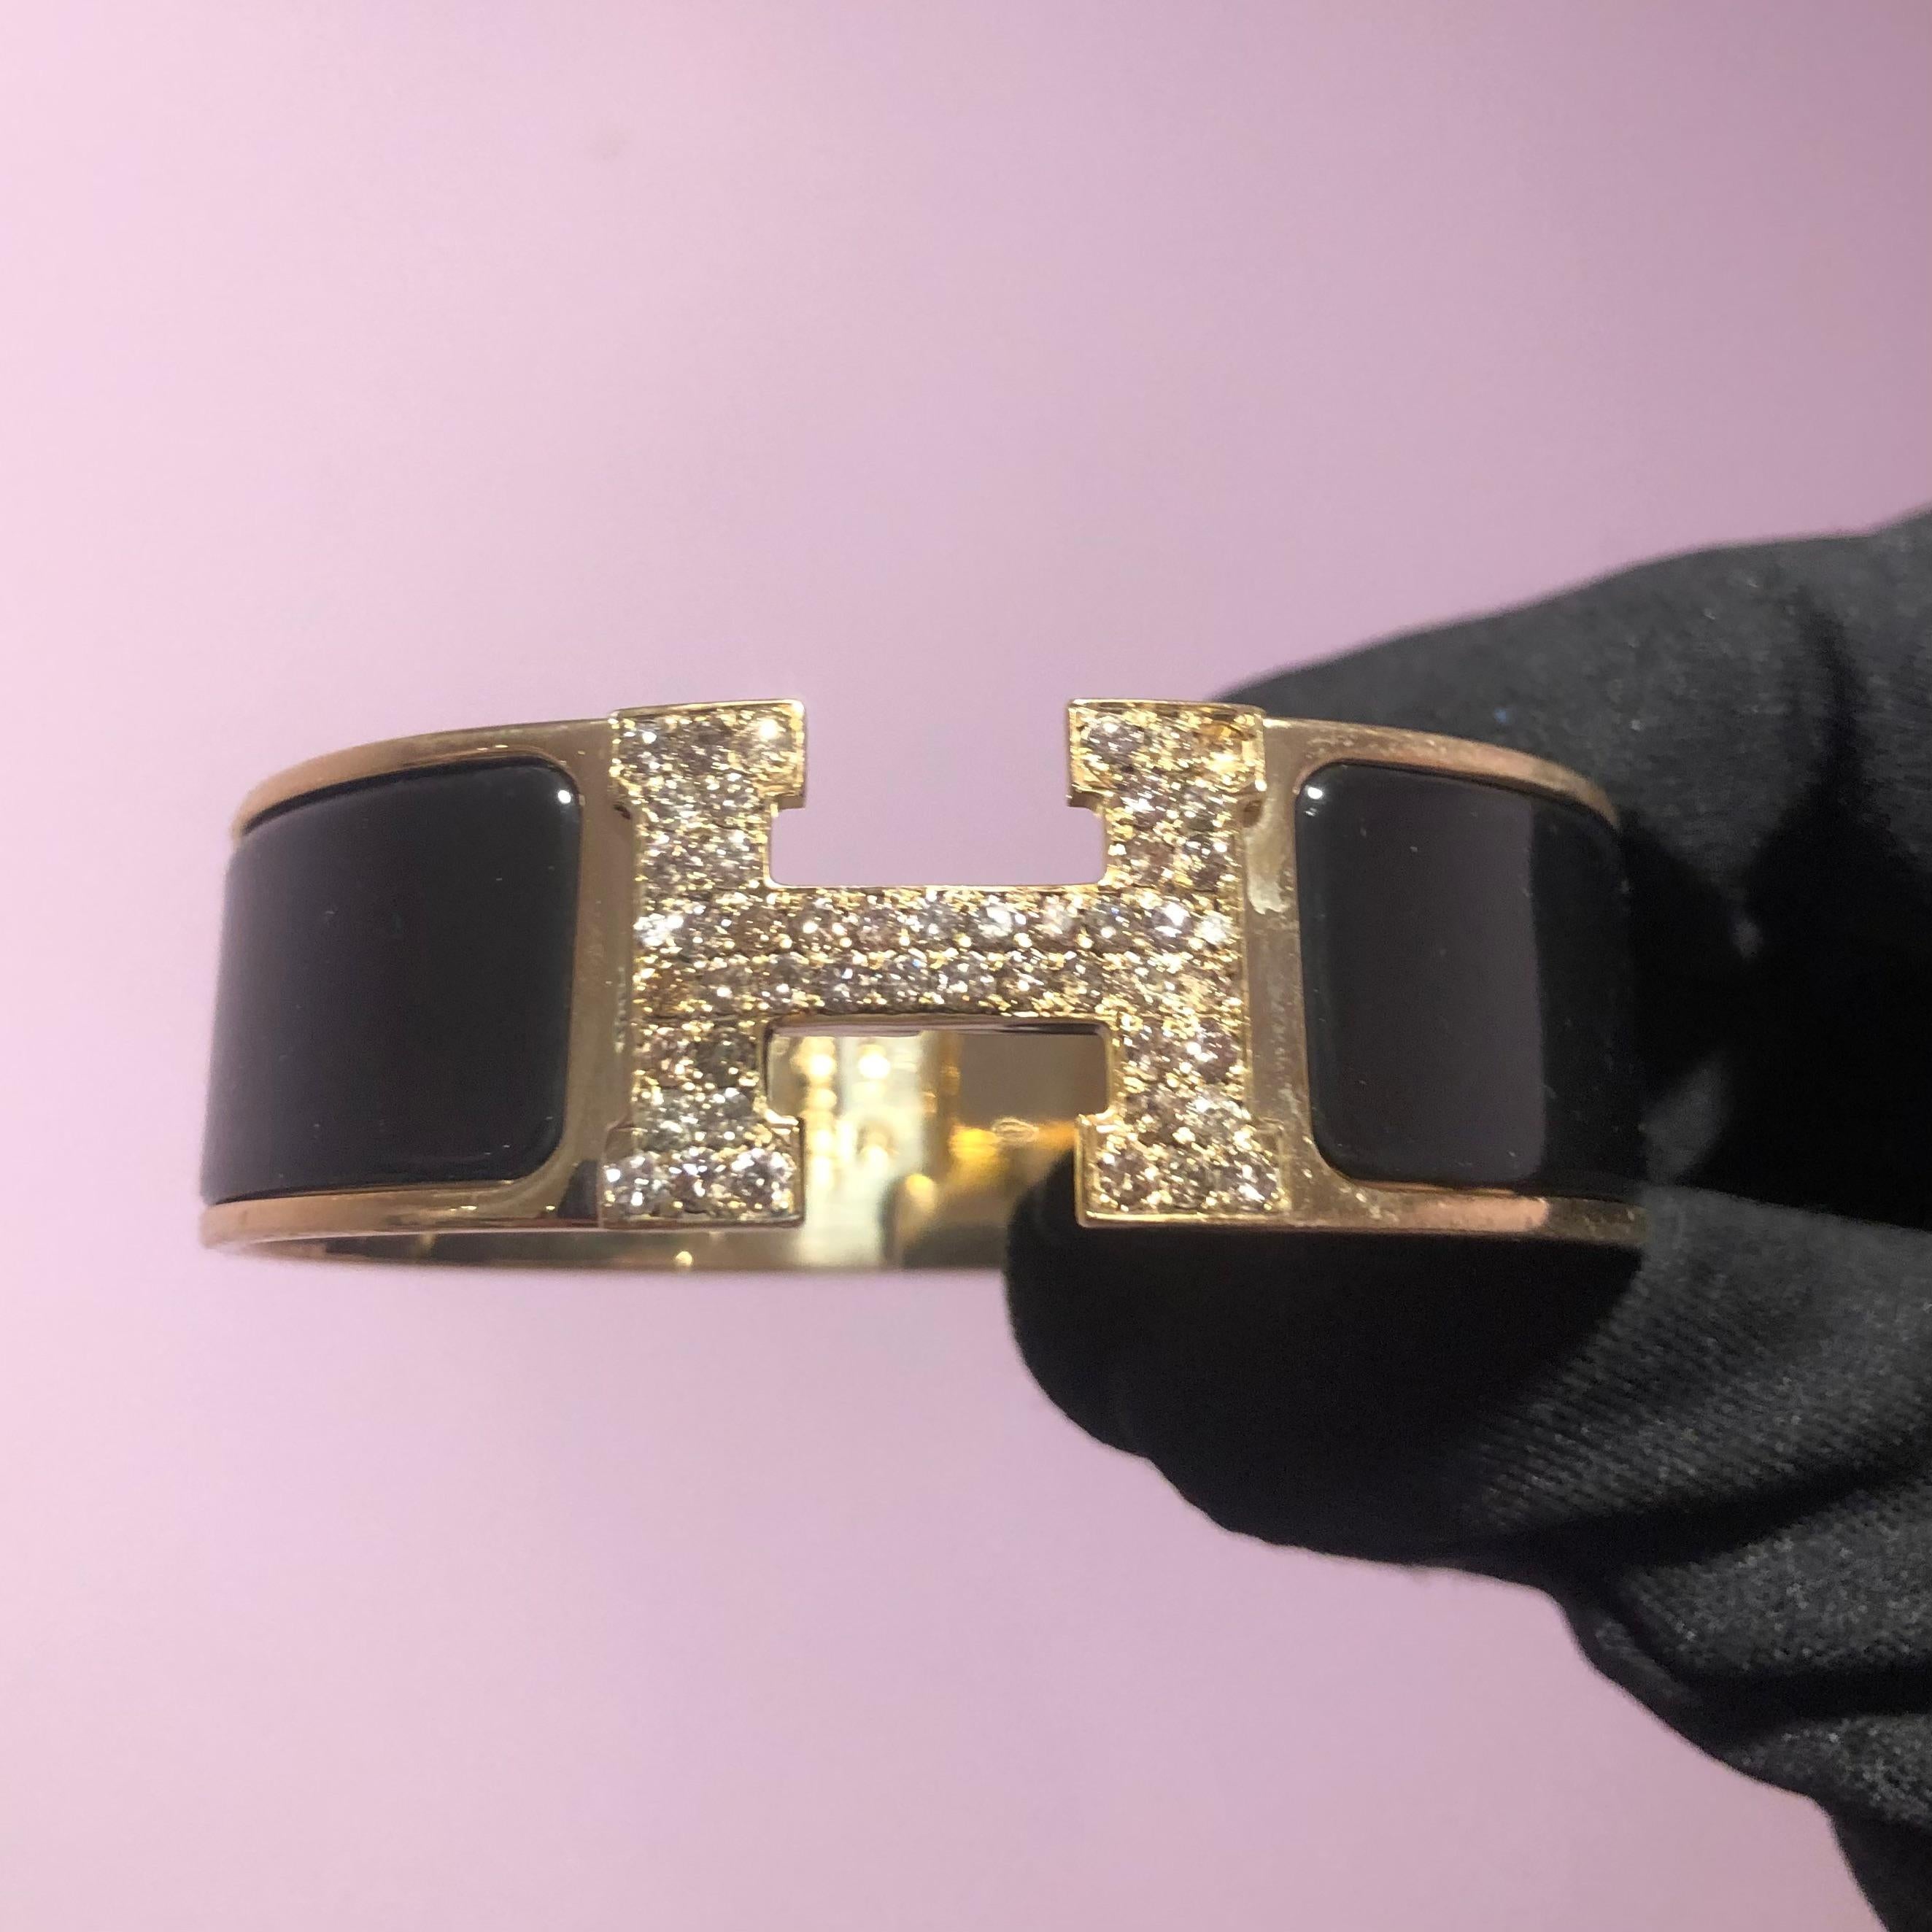 Custom Diamond Hermes Clic Clac H Bracelet complete with original box and booklet papers.

An original Hermes Clic Clac H bracelet GM size in black and gold color is customized hand-set with approx. 2.00 carats of natural genuine earth-mined SI-I